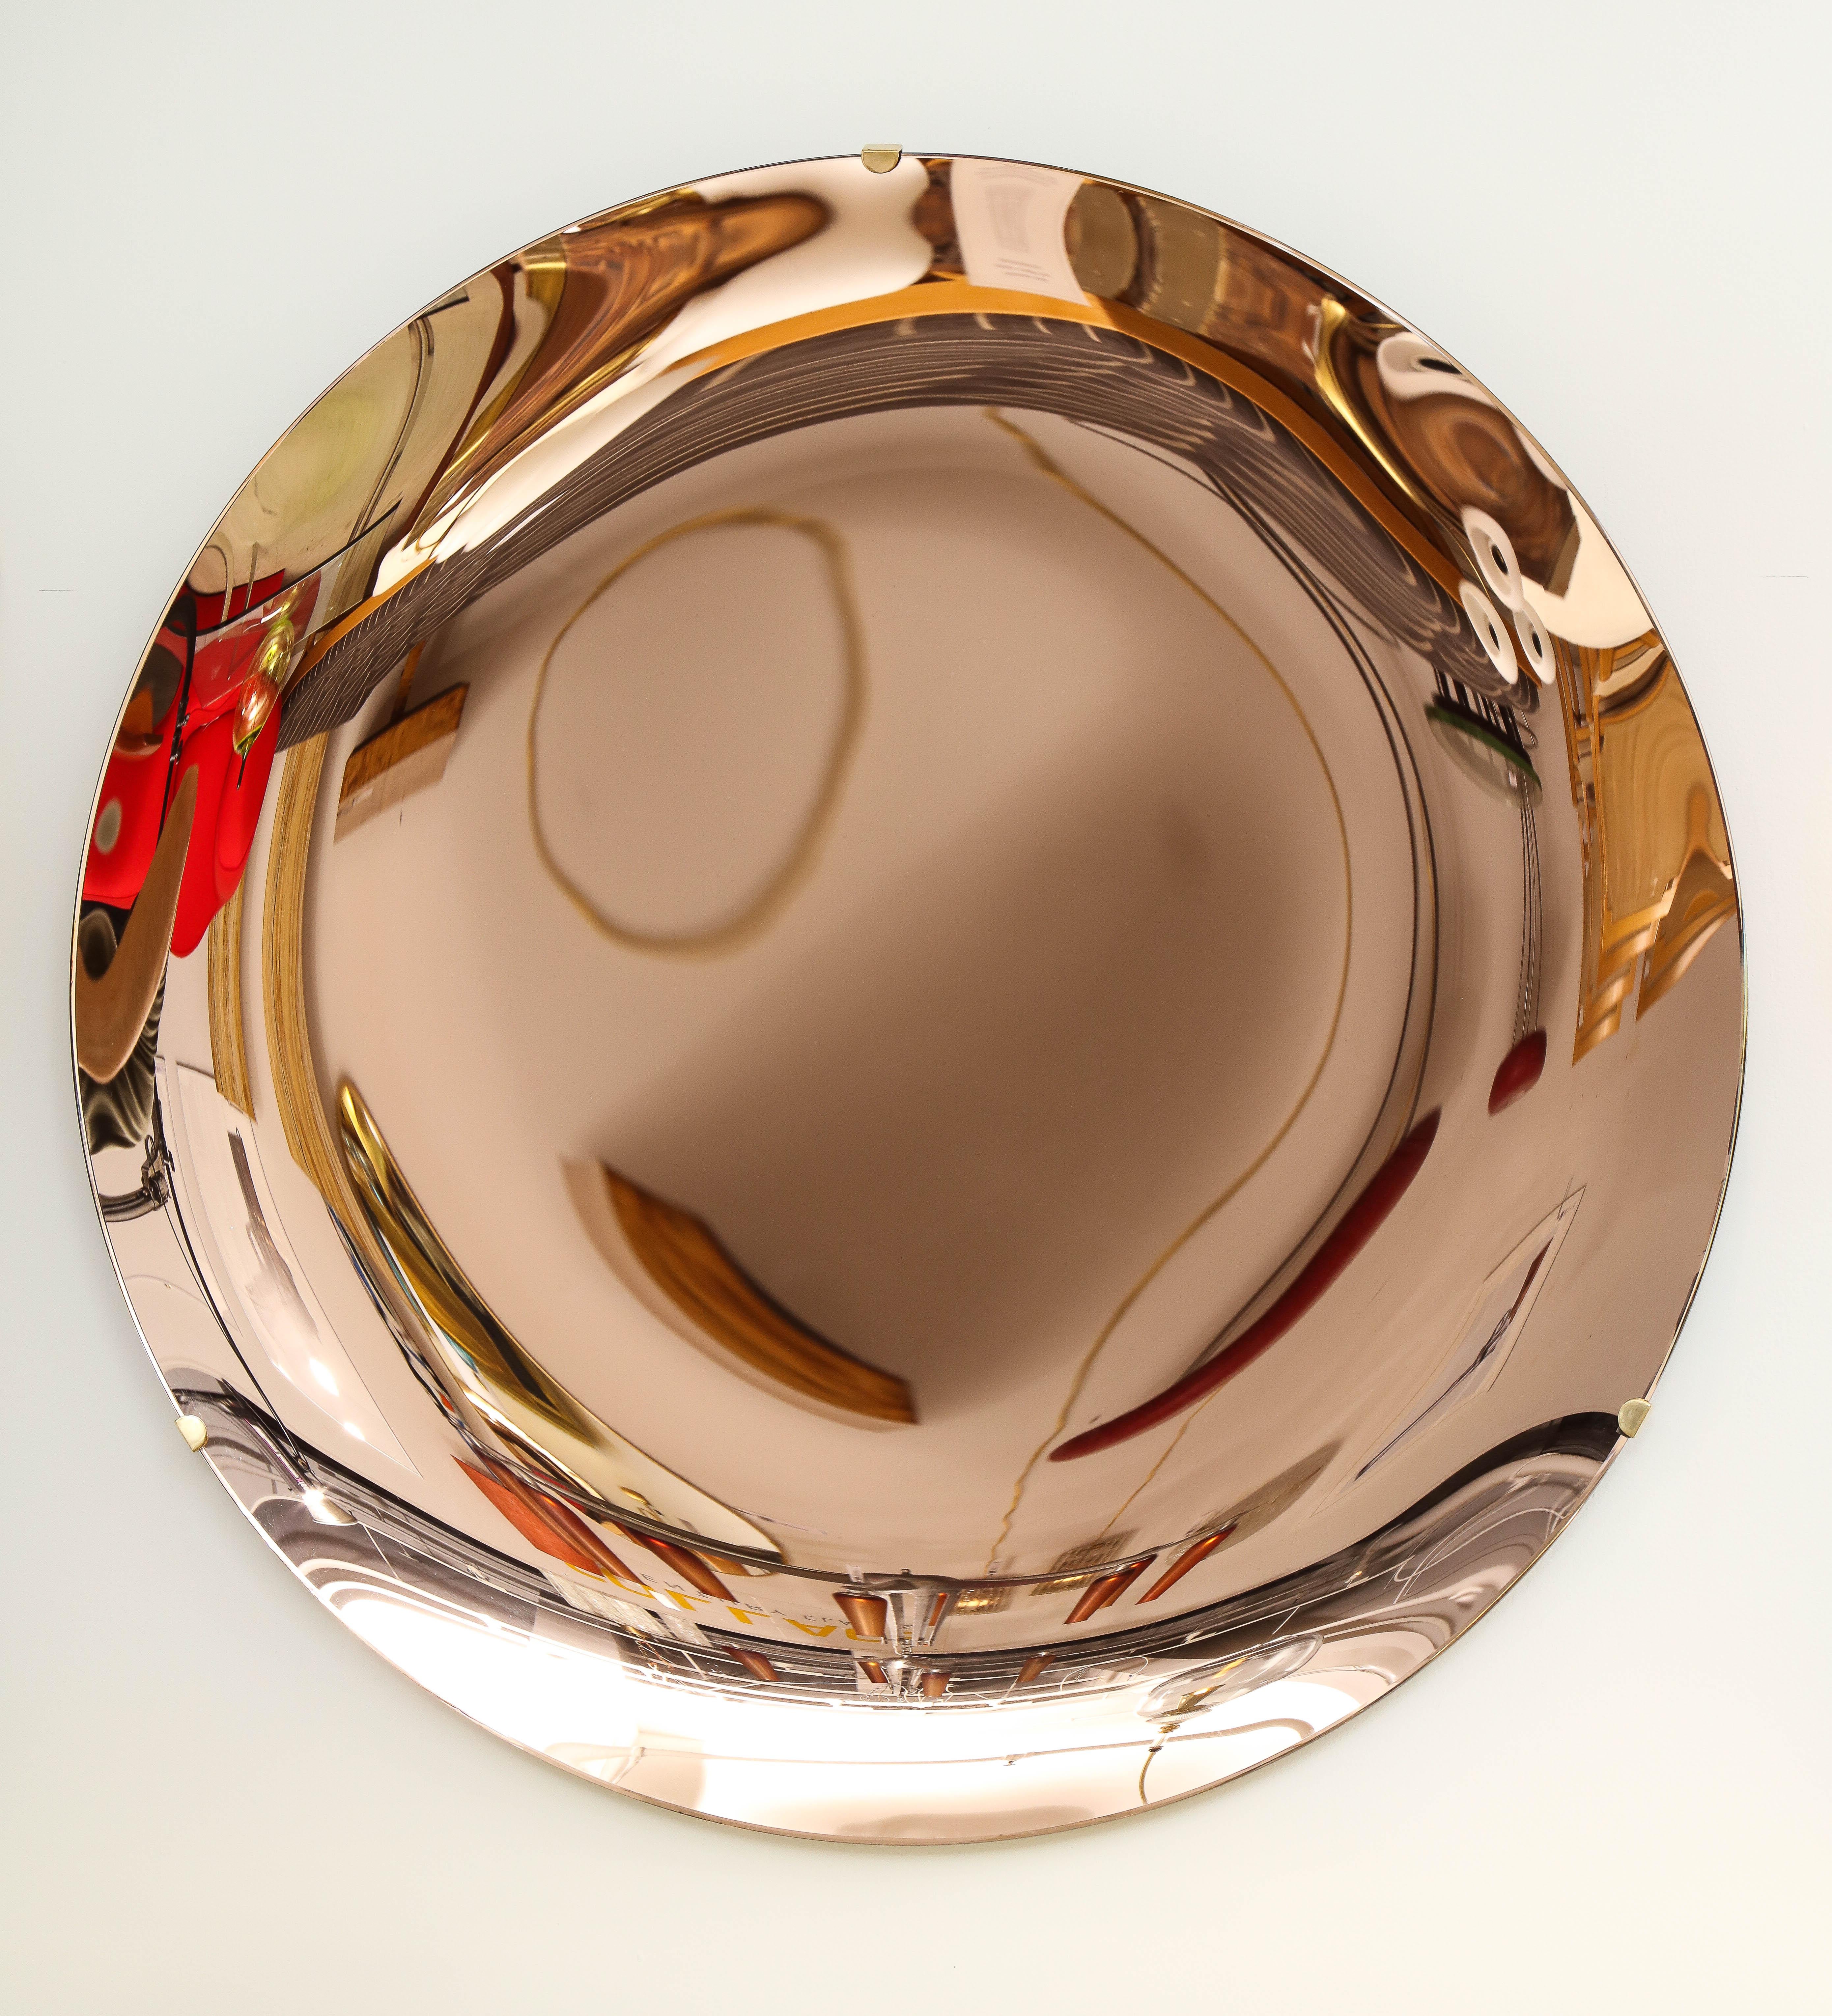 Large round tinted glass in a beautiful soft salmon or rose hue, thermoformed into a sculptural concave form and mirrored to create a stunning optical lens effect. Mounted on a brass structure that is attached to wall. Hand-casted in Milan, Italy,